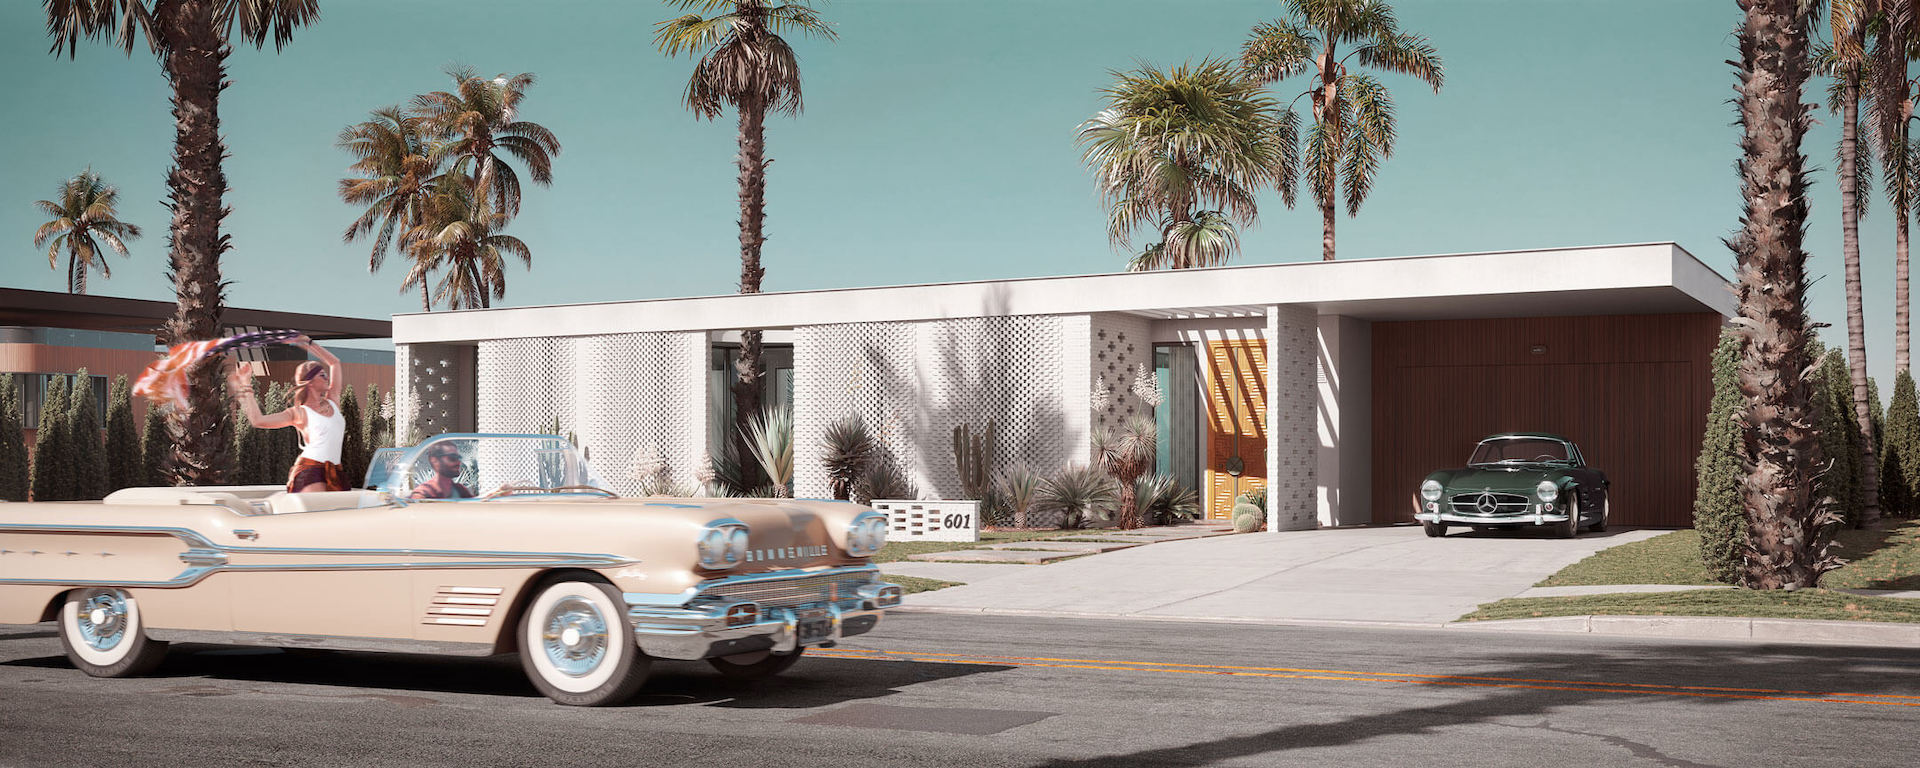 Digital Rendering of a Stylish Retro House in LA for Social Media Update